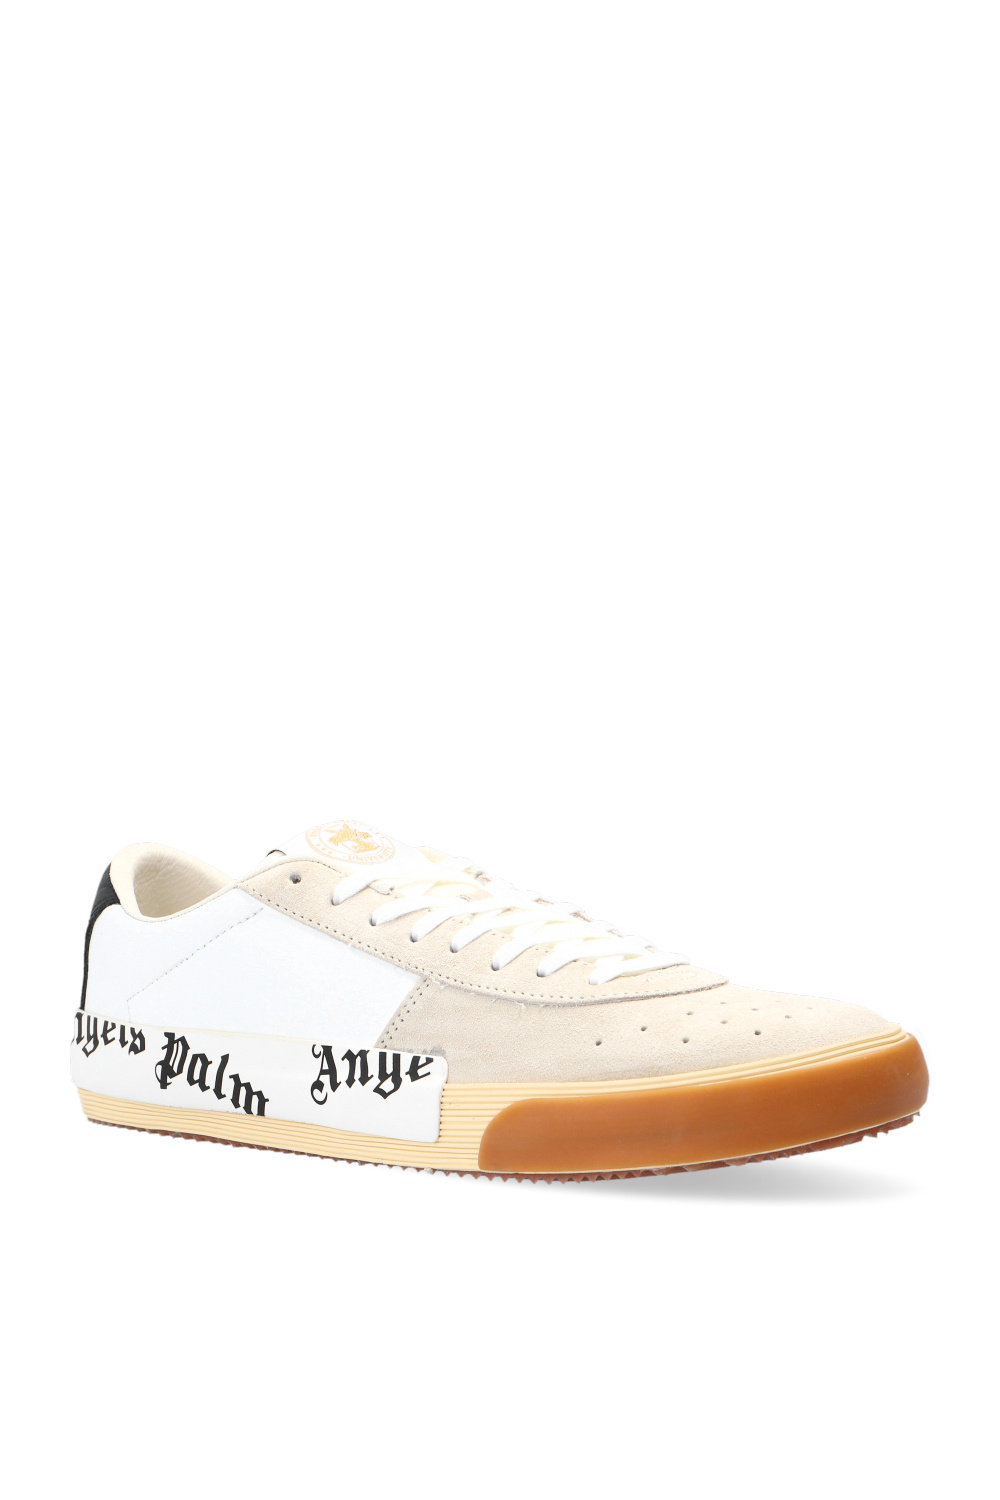 Palm Angels ‘New Vulcanized’ sneakers